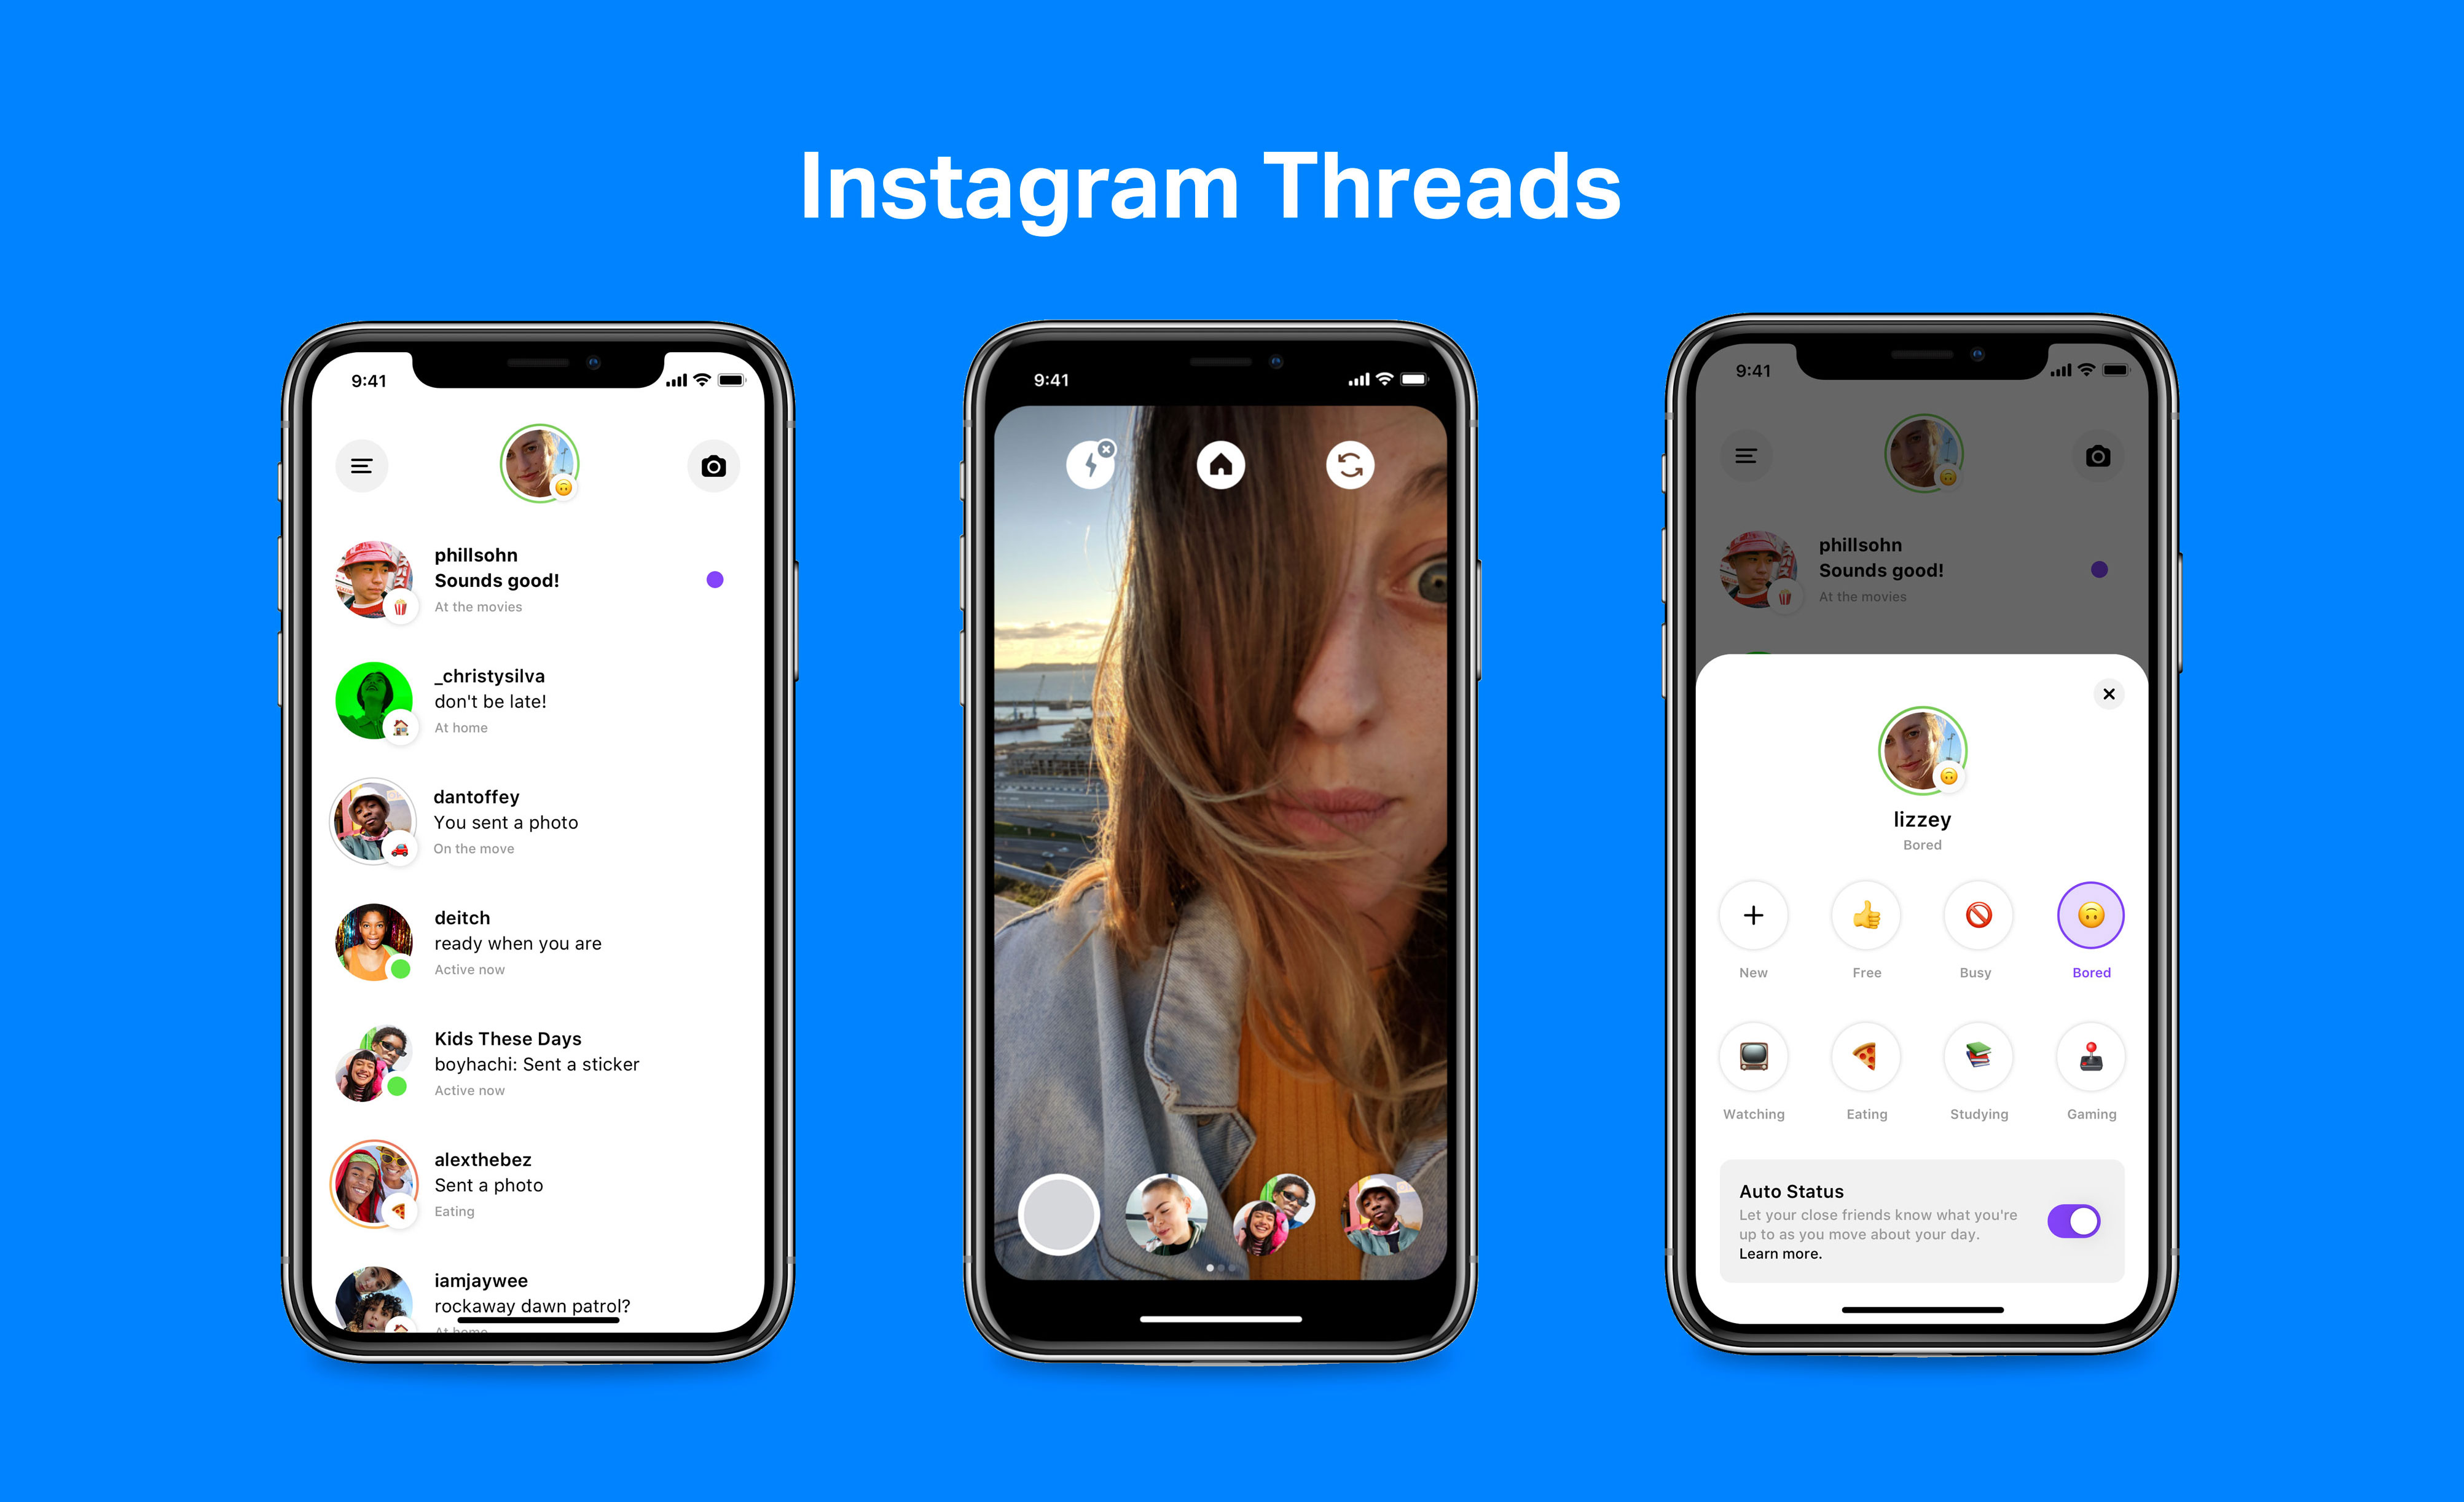 Instagram launches Threads, a Close Friends chat app with auto-status |  TechCrunch